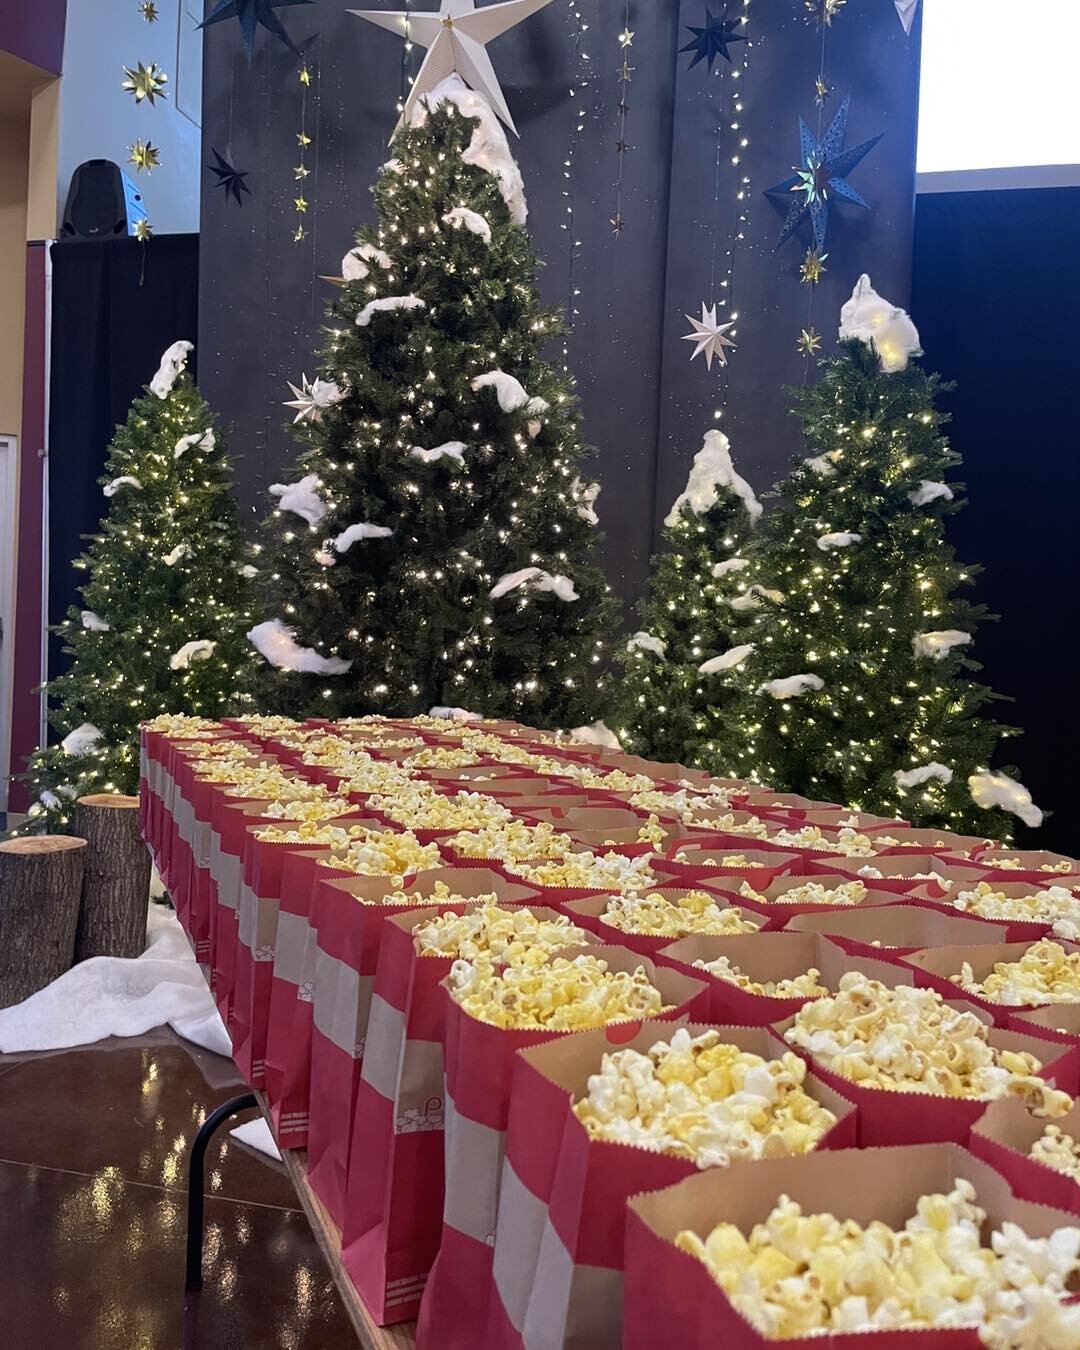 Over the past couple of weeks we have had the opportunity to show Christmas movies to almost 1000 of your Kindergarten- high school aged students! We just want to take a minute to thank all of the students, PTOs, teachers, and staff who have made com